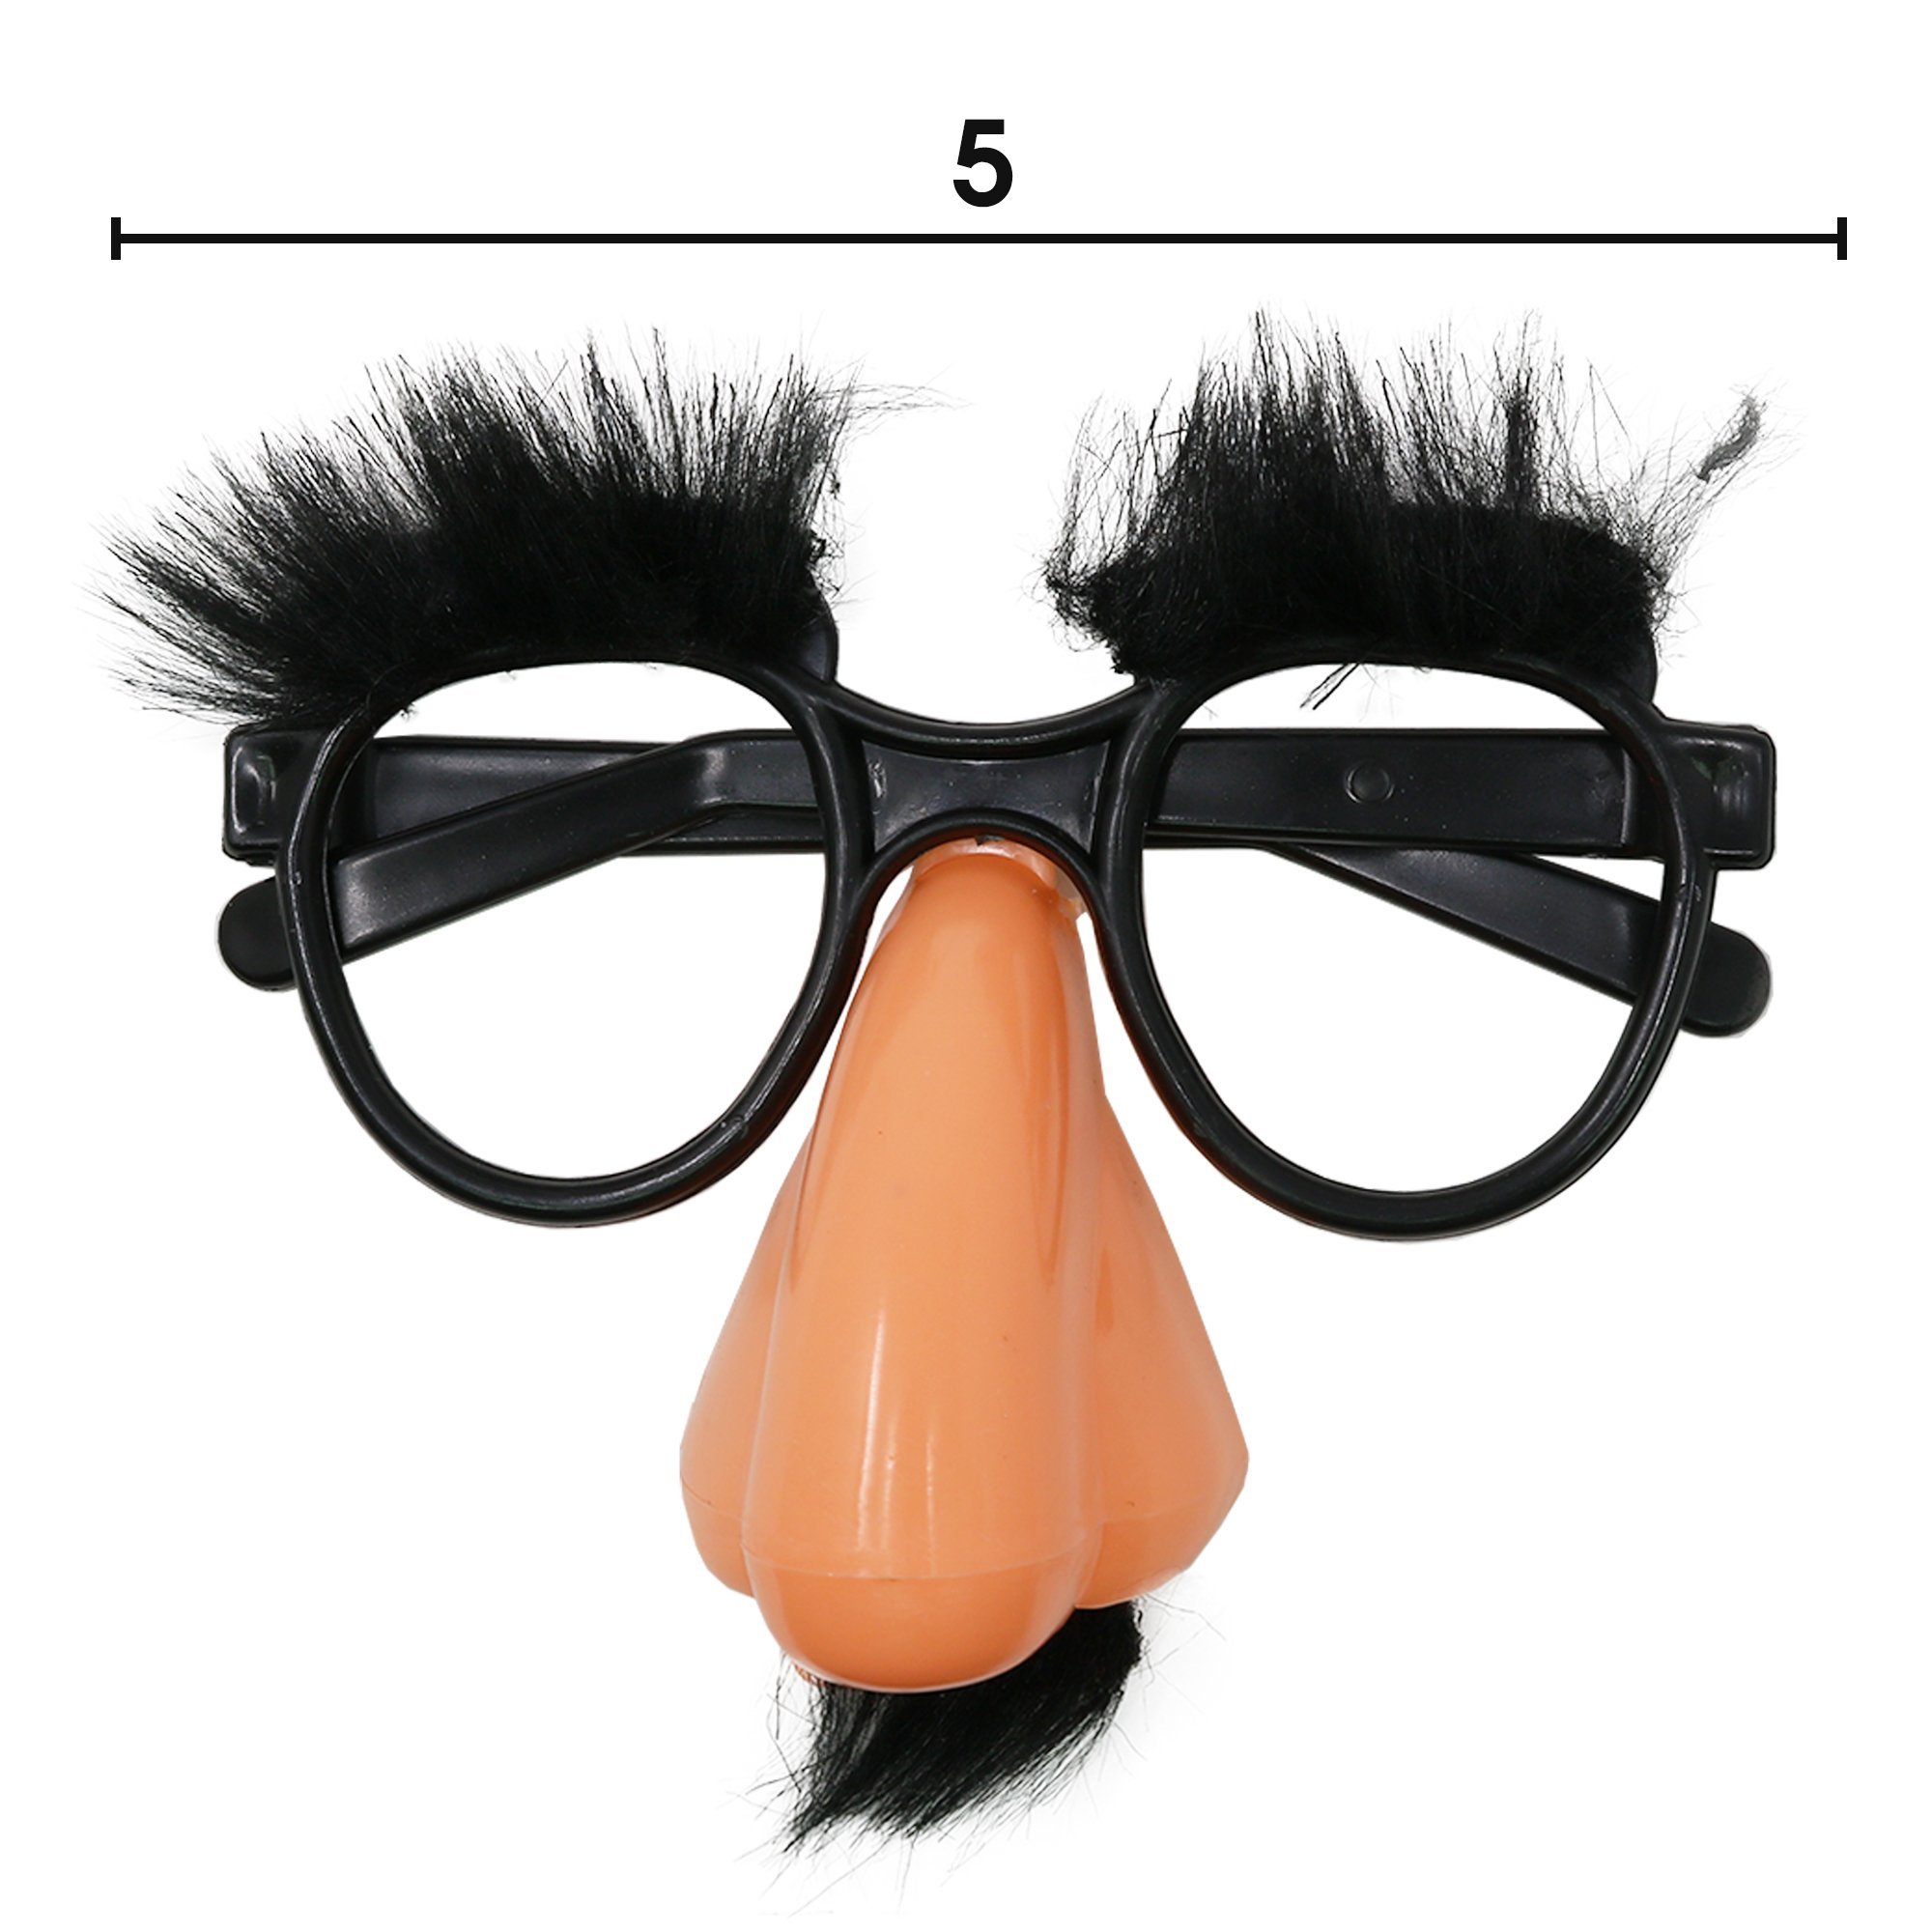 Disguise Glasses with Nose - Groucho Marx Funny Glasses - 1 Piece - image 5 of 5